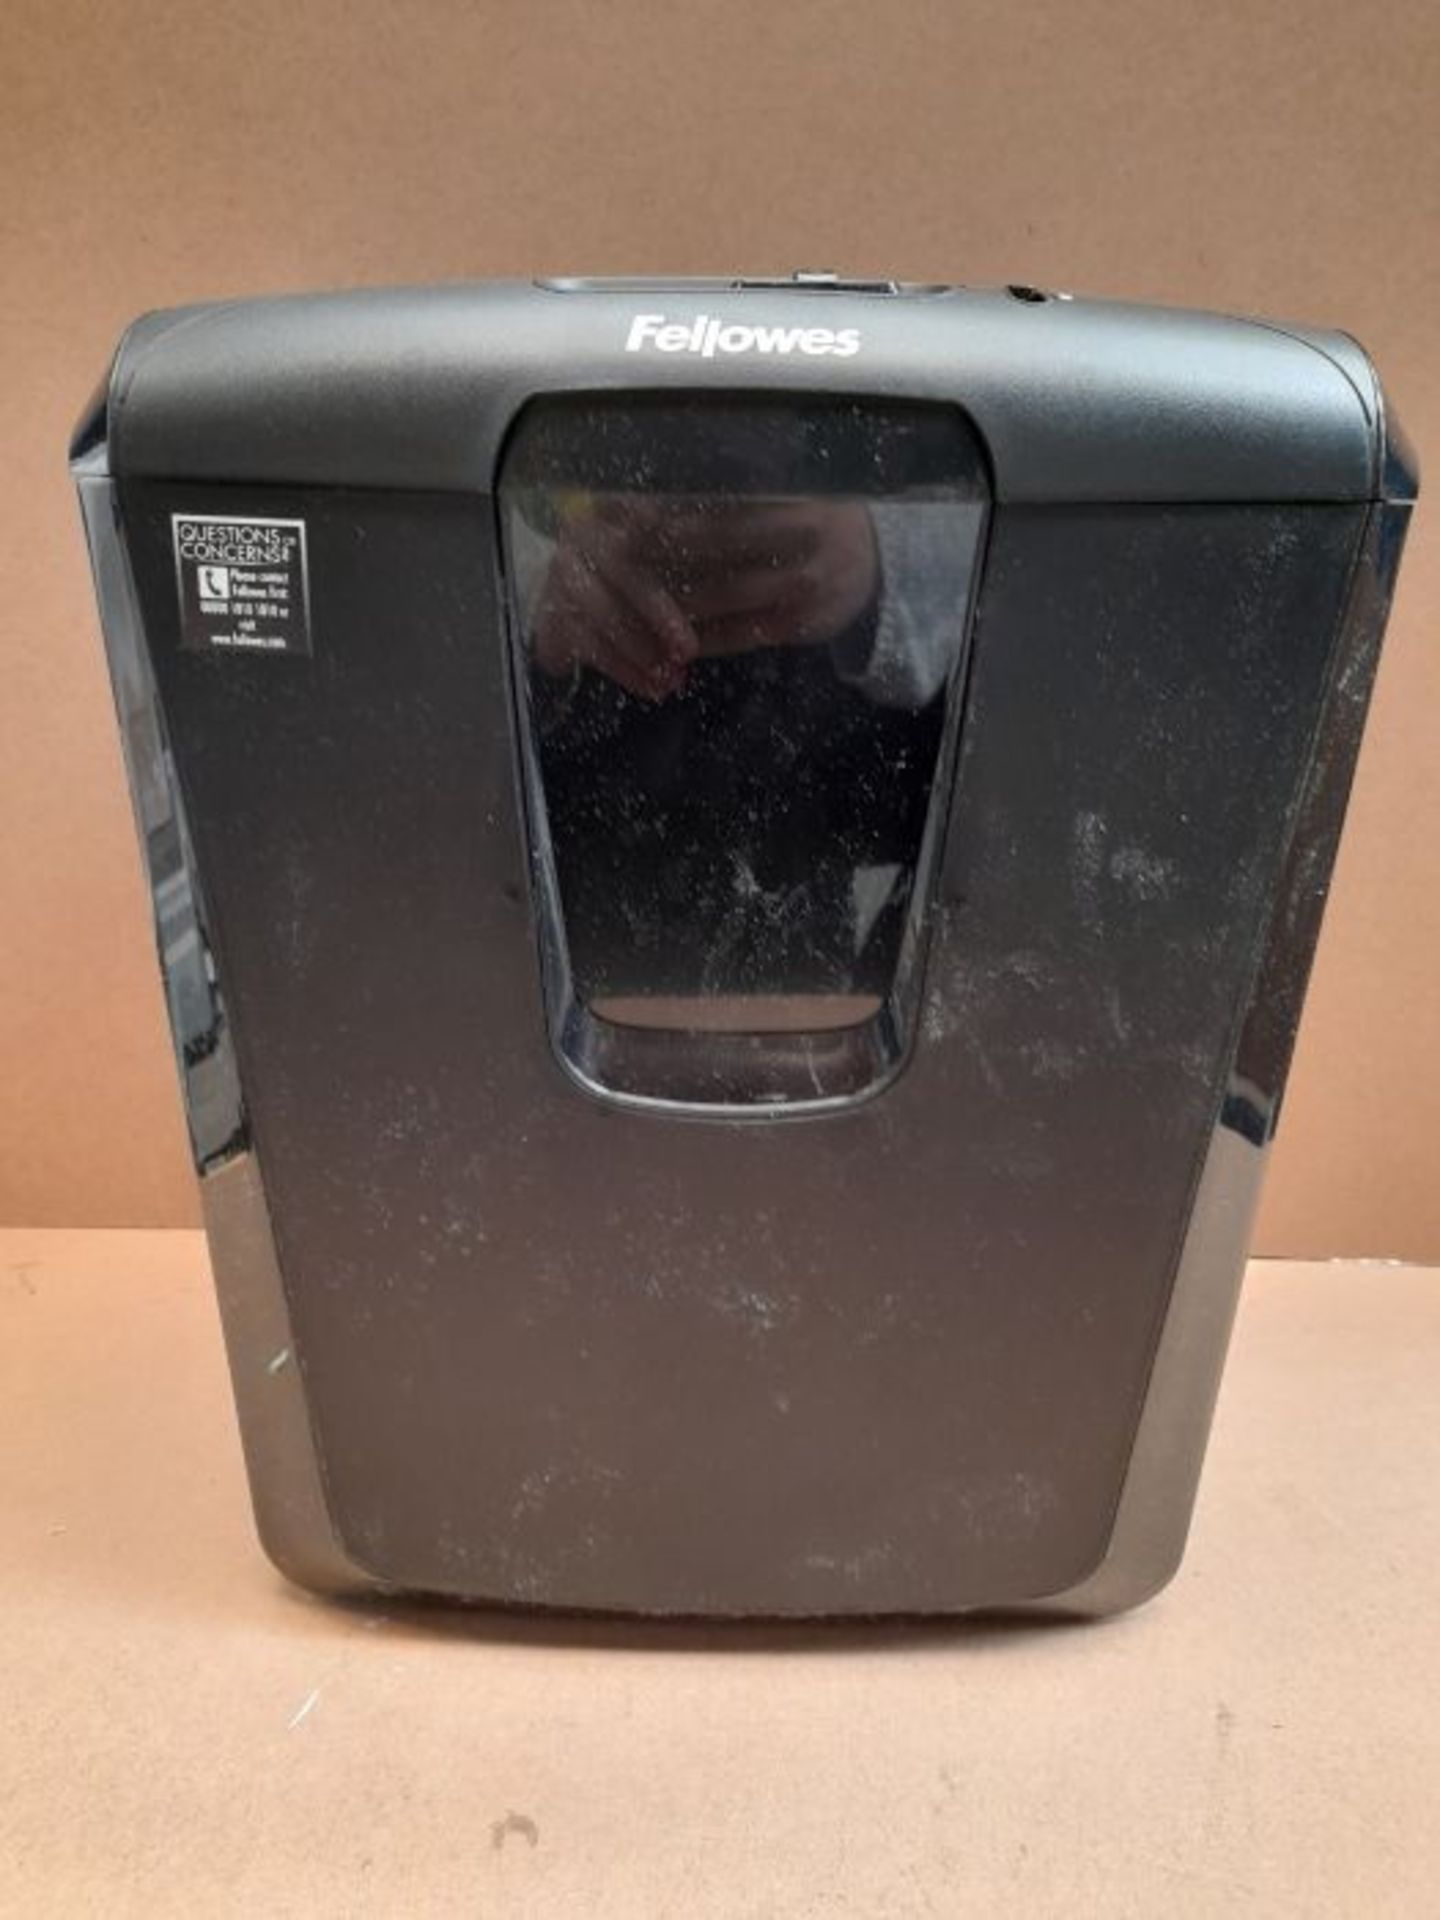 Fellowes Powershred M-8C 8 Sheet Cross Cut Personal Shredder with Safety Lock - Image 3 of 6